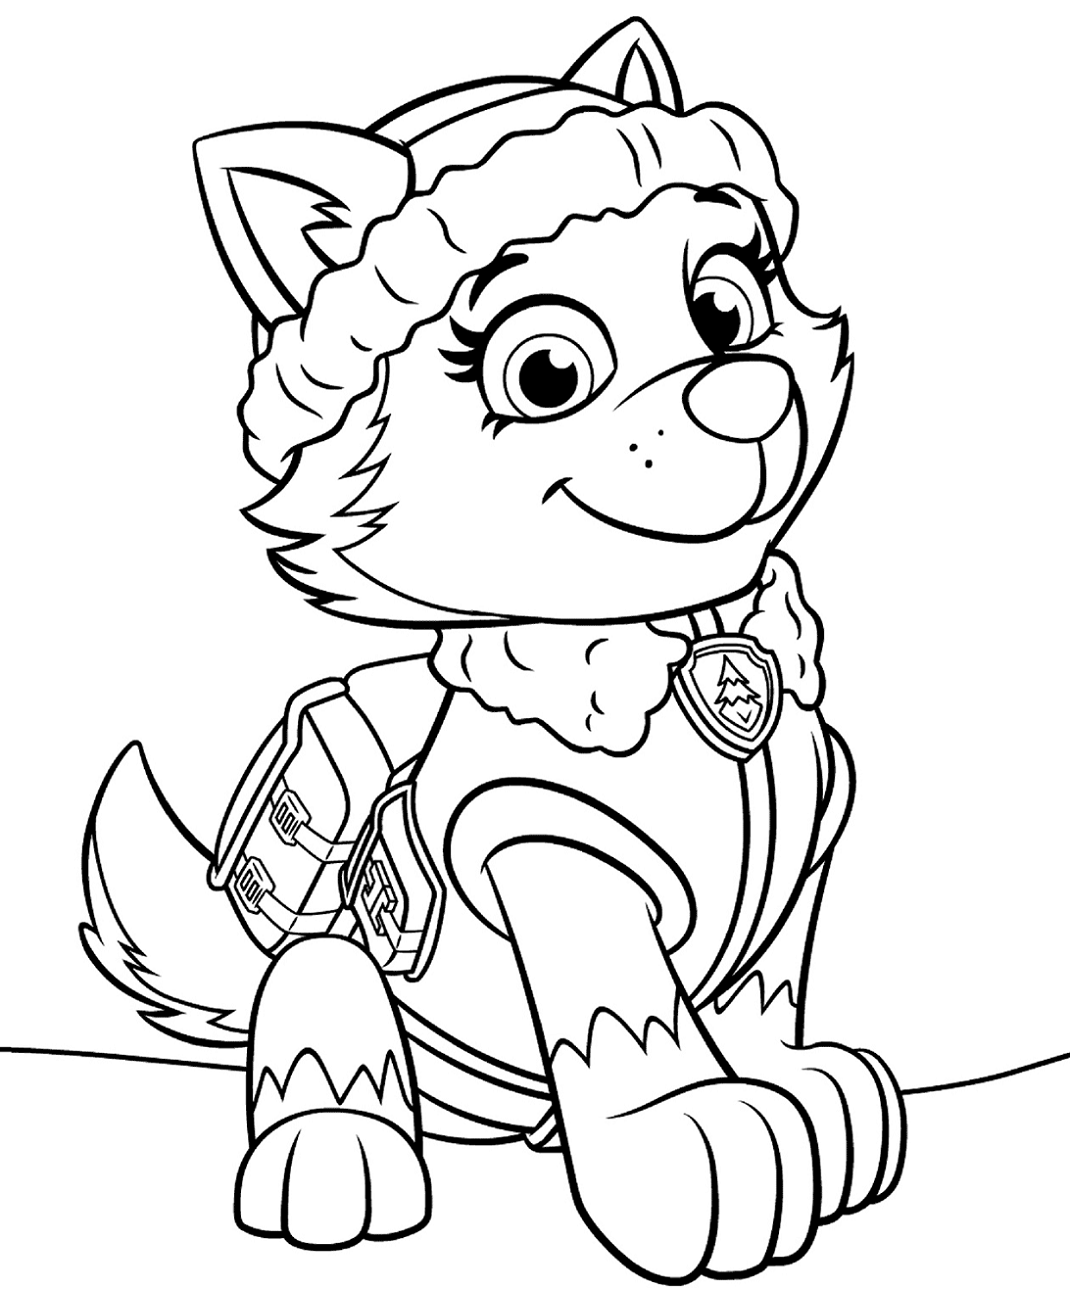 Garanti suge produktion Everest Paw Patrol Coloring Pages - Free Printable Coloring Pages for Kids